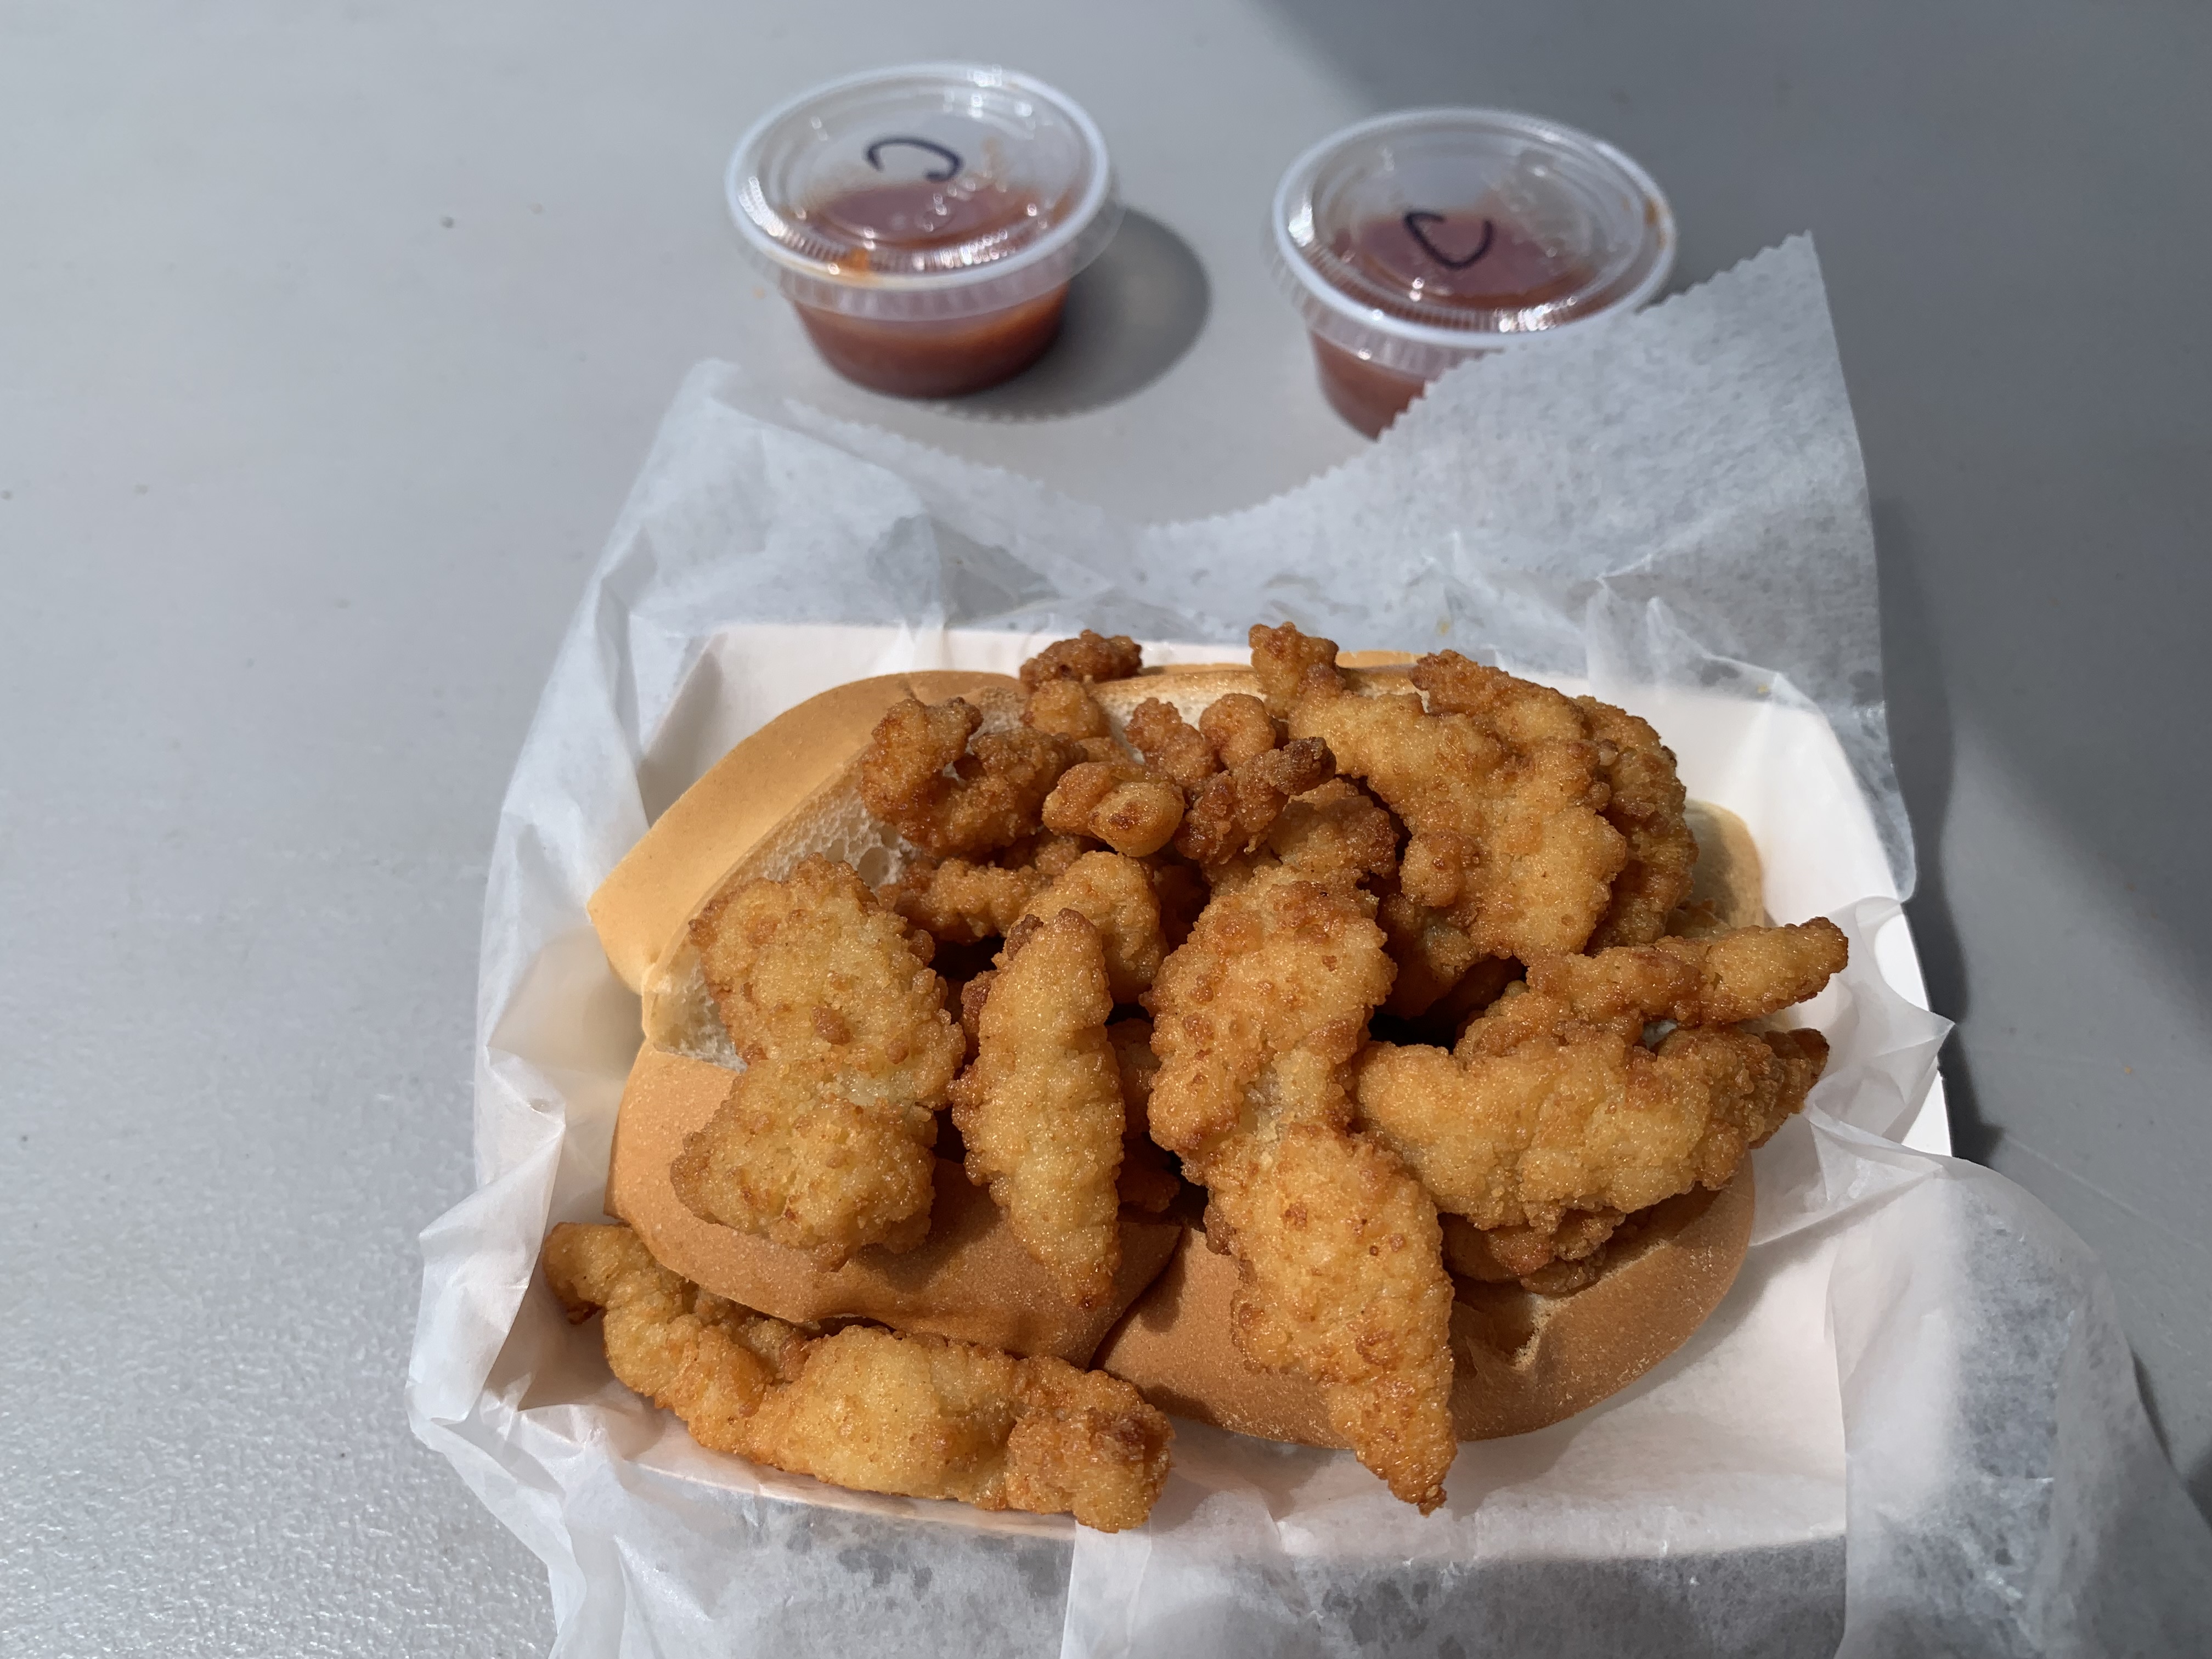 Fried clams from JJ's at the 2023 New York State Fair. (Rick Moriarty | rmoriarty@syracsue.com)